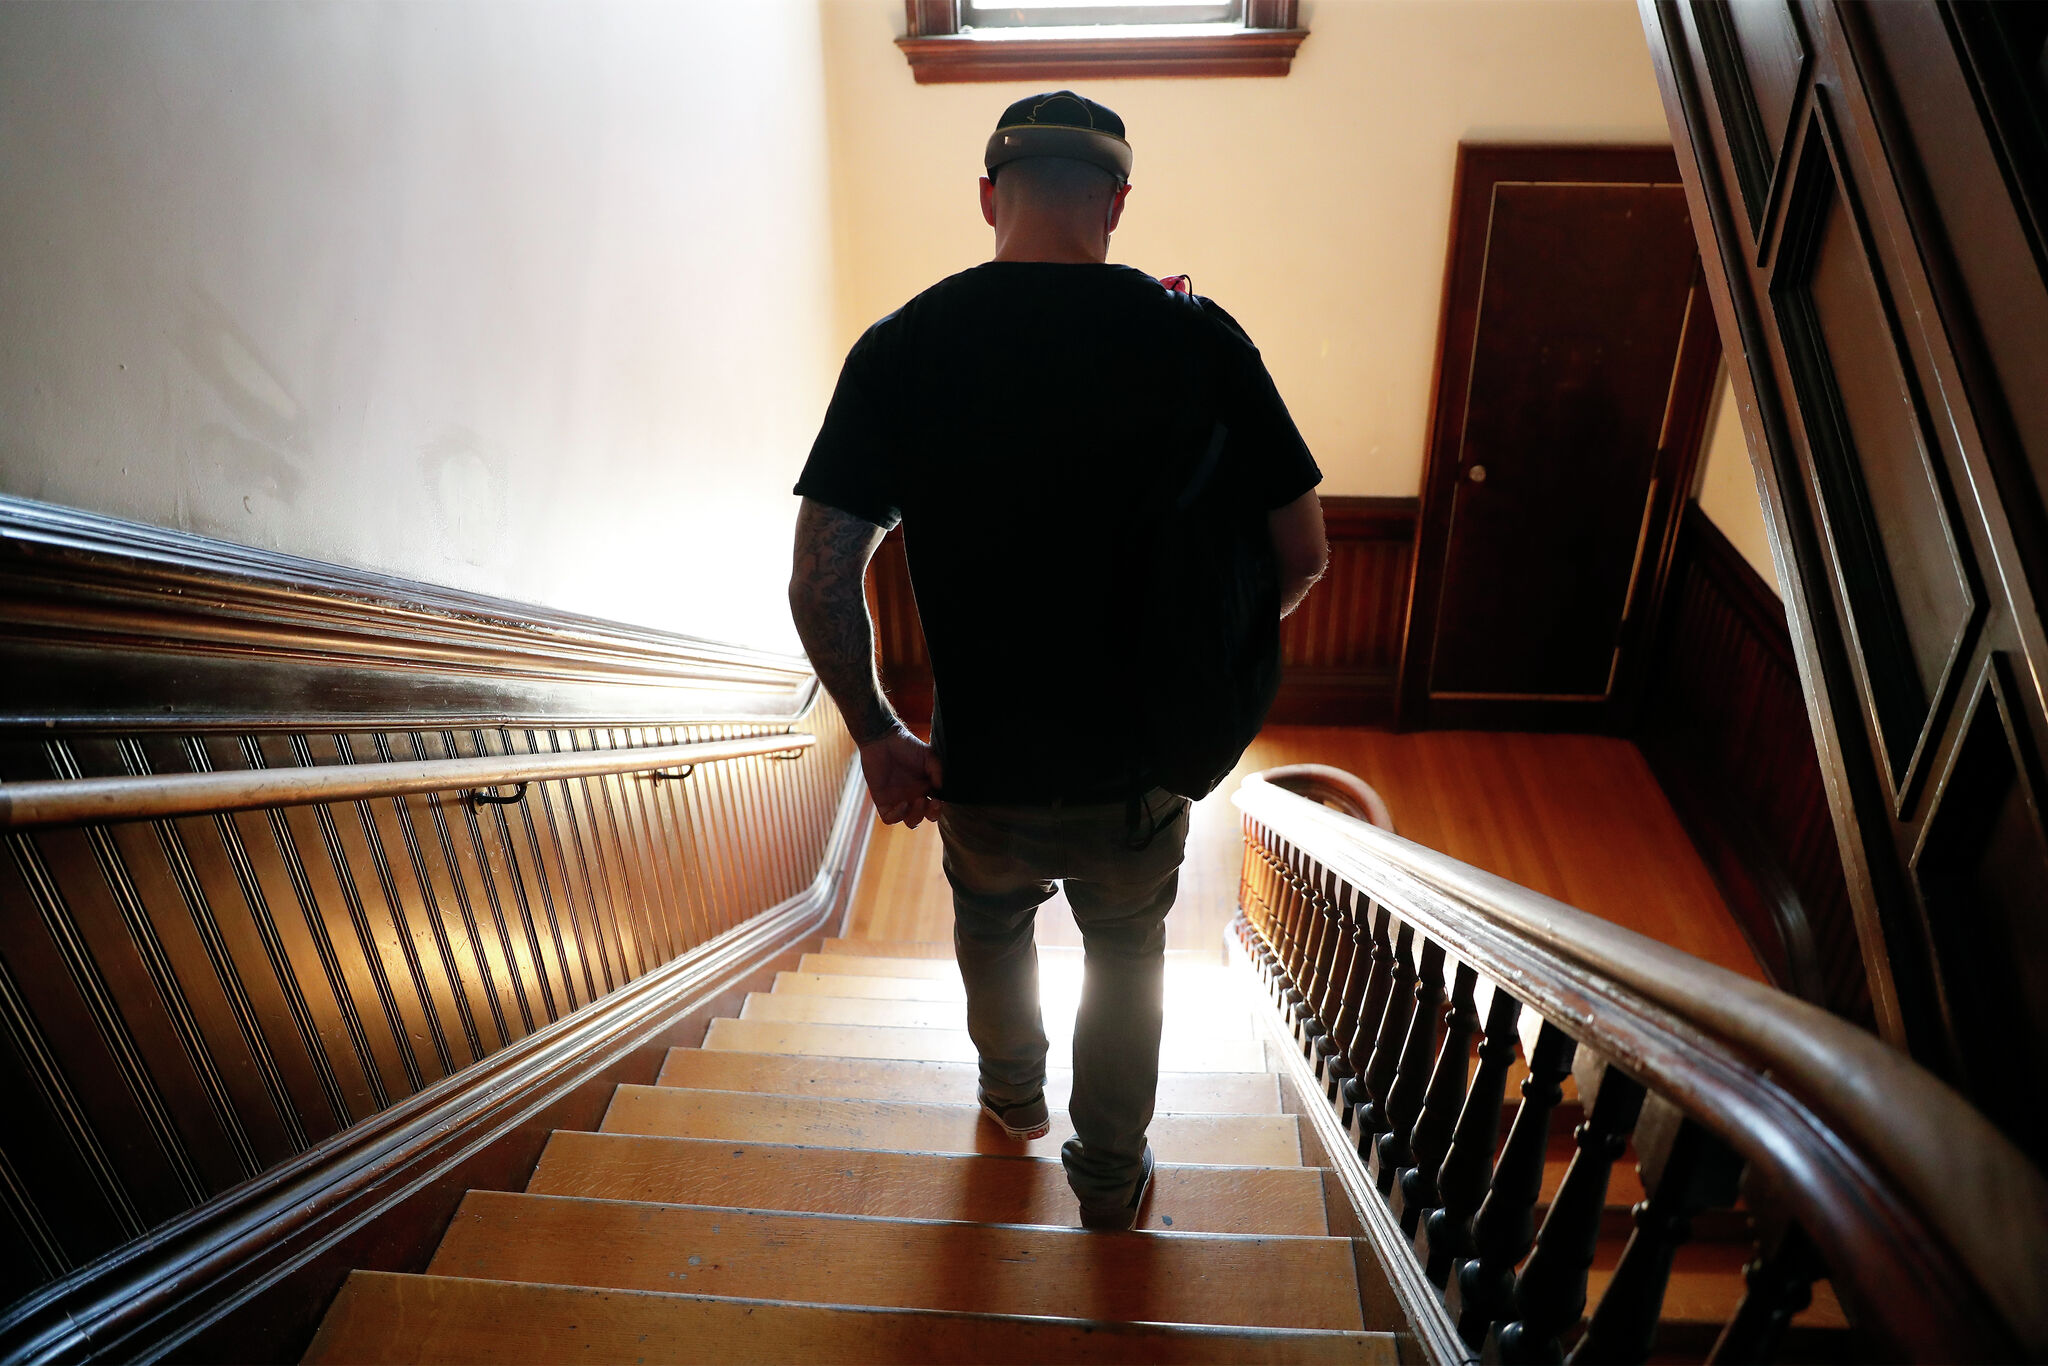 Hoping Recovery Works will benefit many local drug addicts, Opinion